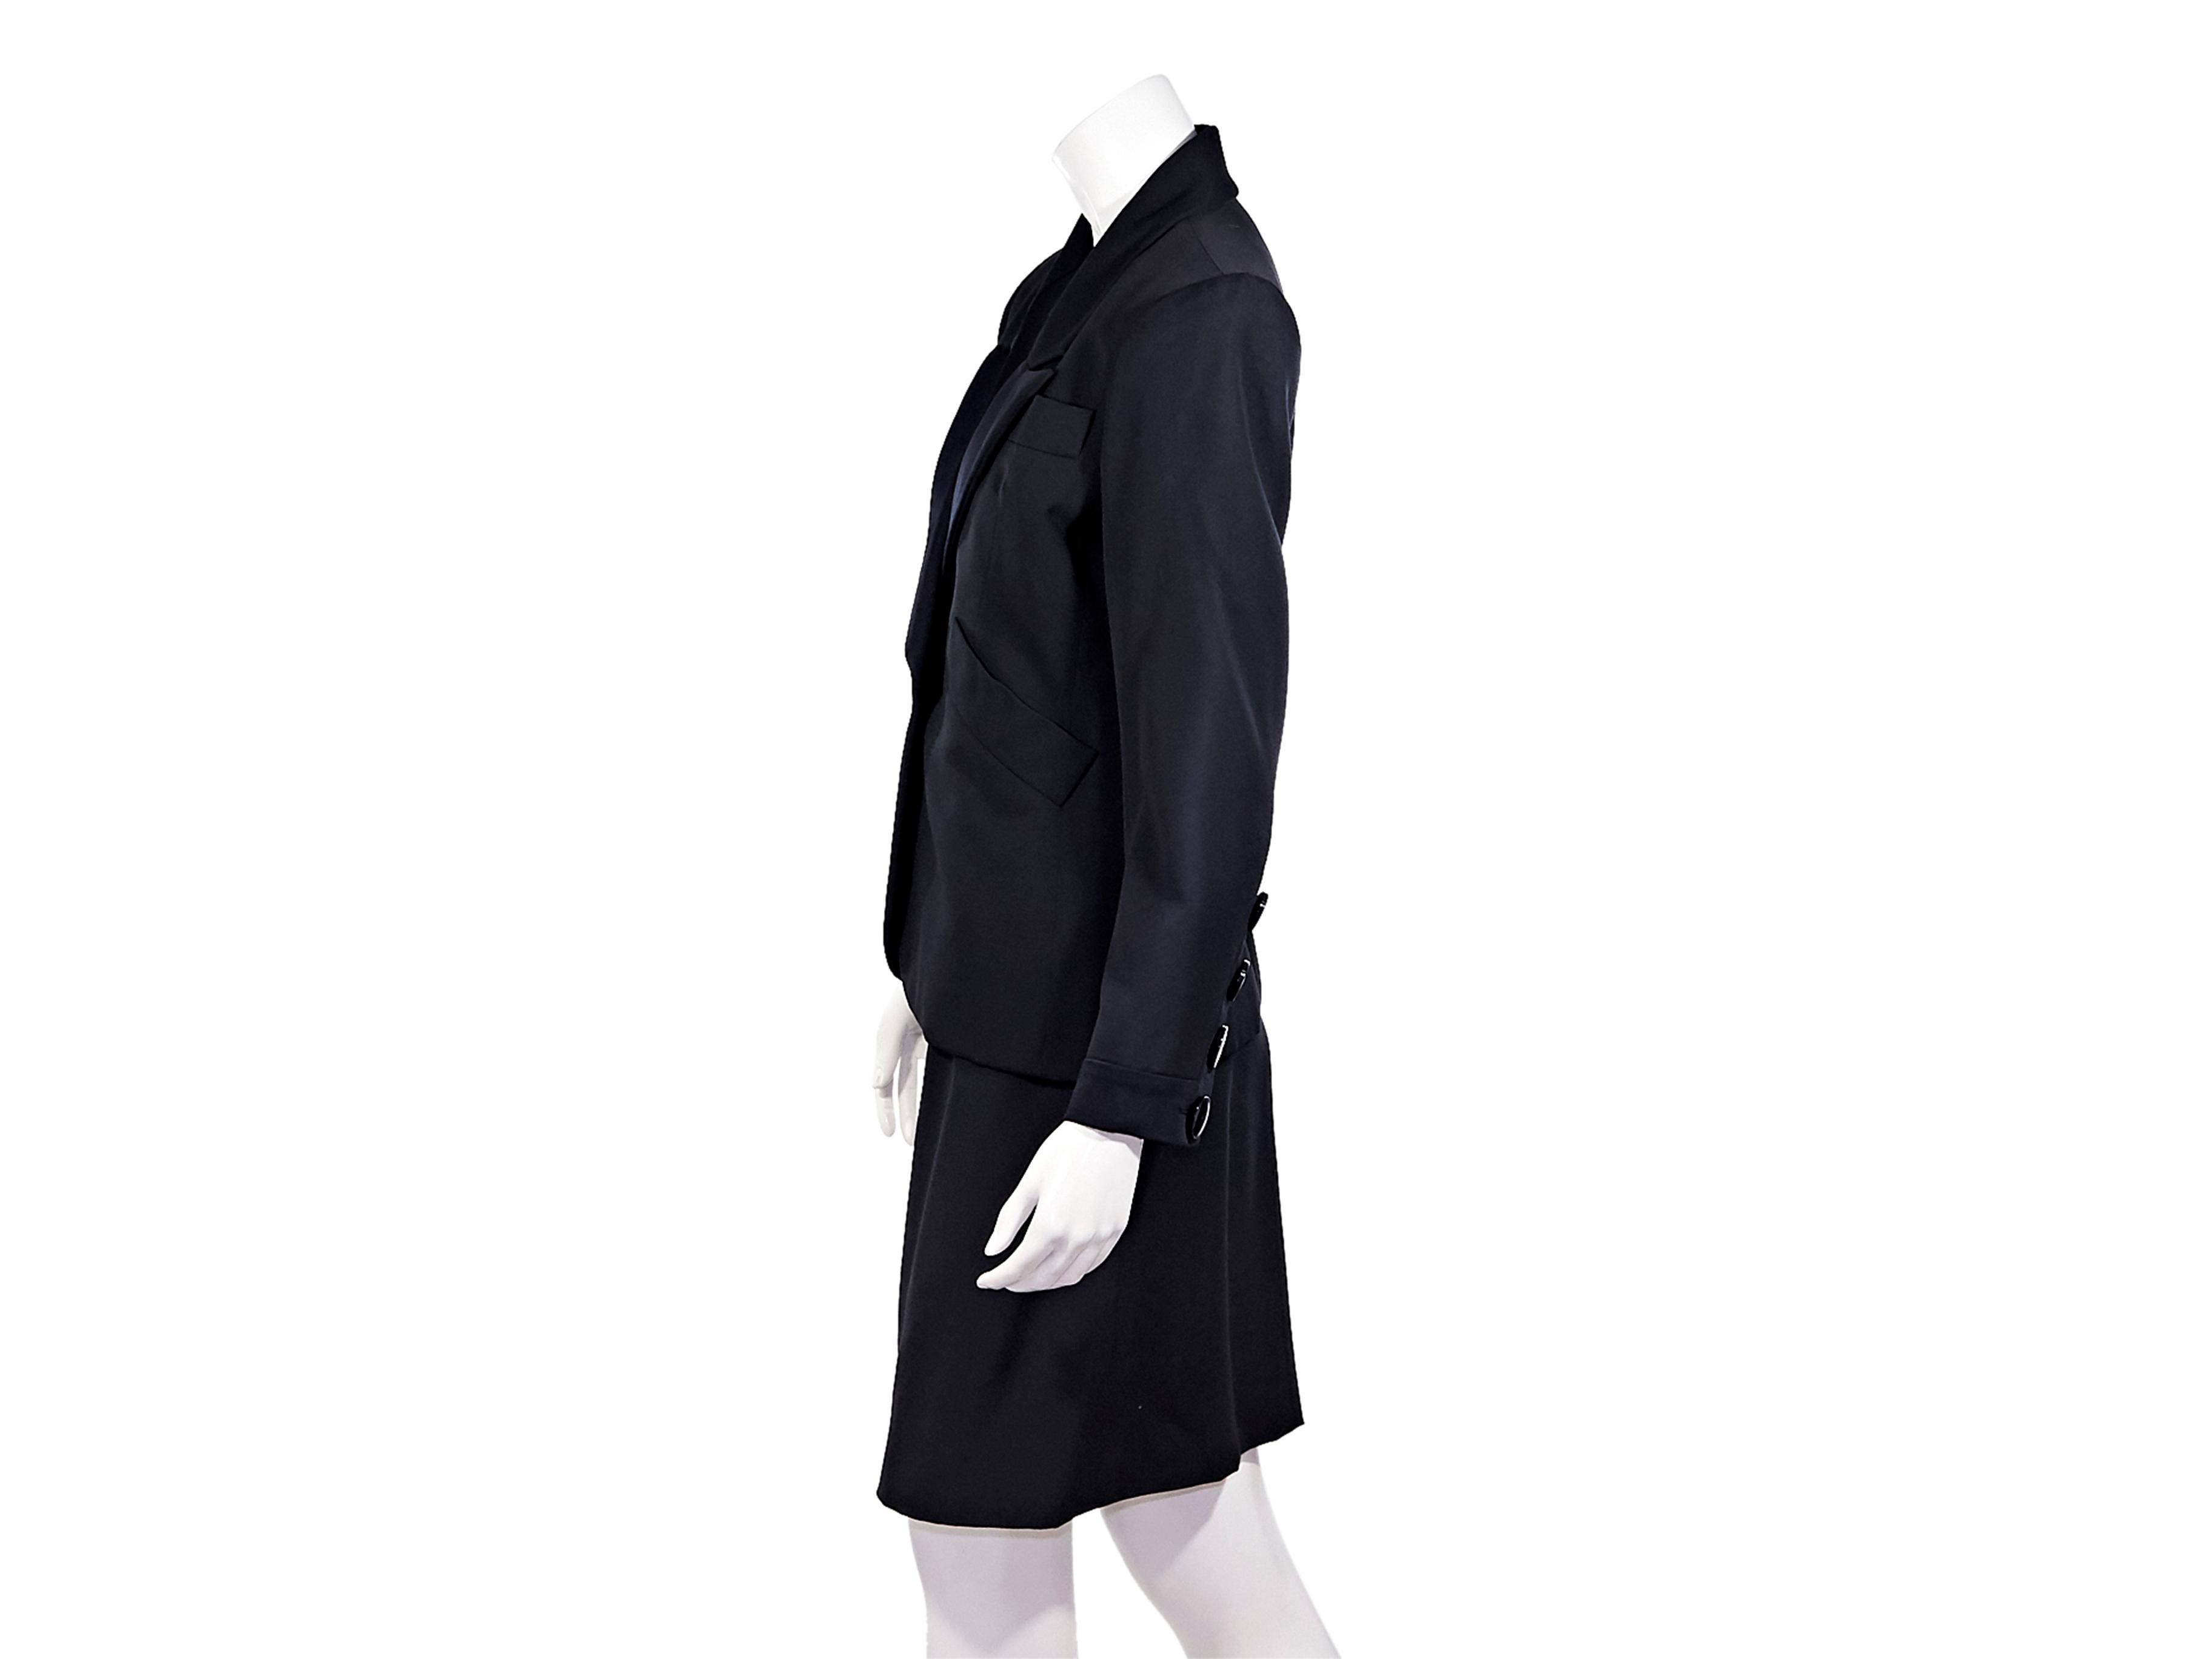 Product details:  Vintage black wool skirt suit set by Yves Saint Laurent.  Peaked satin lapel.  Long sleeves.  Four-button detail at cuffs.  Single-button closure.  Waist slide pockets.  Matching pencil skirt.  Banded waist.  Side button and zip